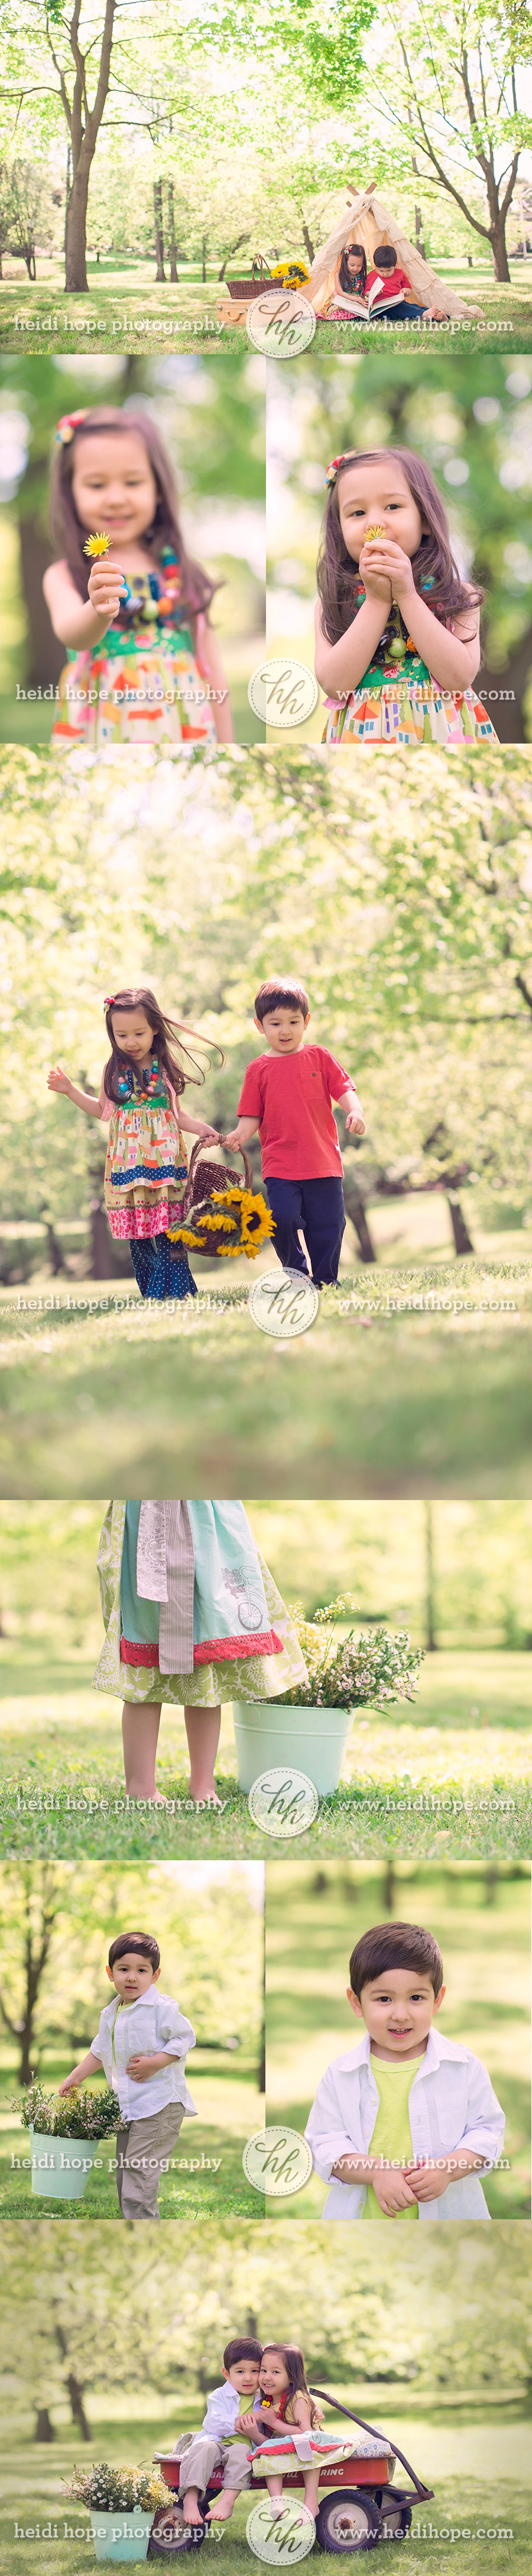 chldrens_commercial_photographer